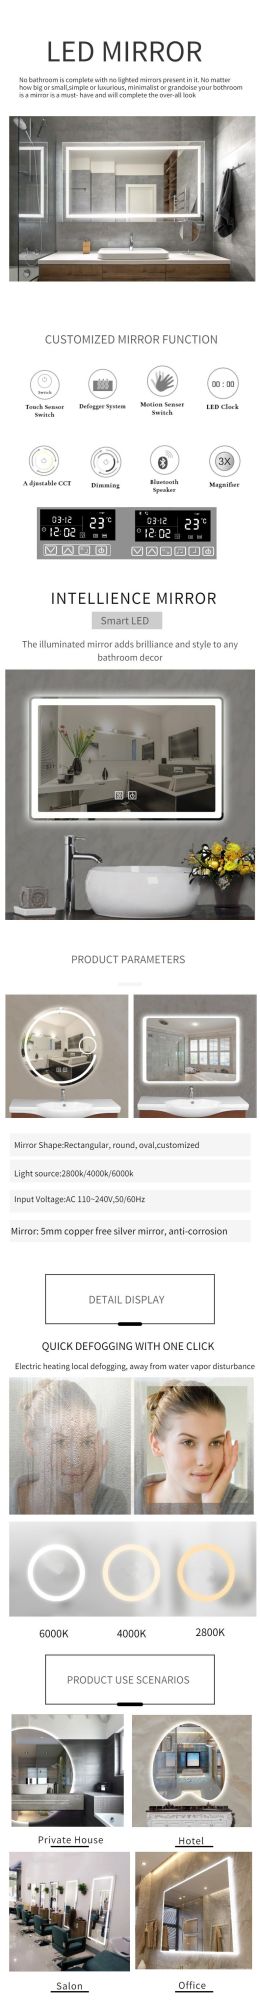 Touched Mirrors Quality LED Mirror Cheap Price Discounted Bathroom Vanity